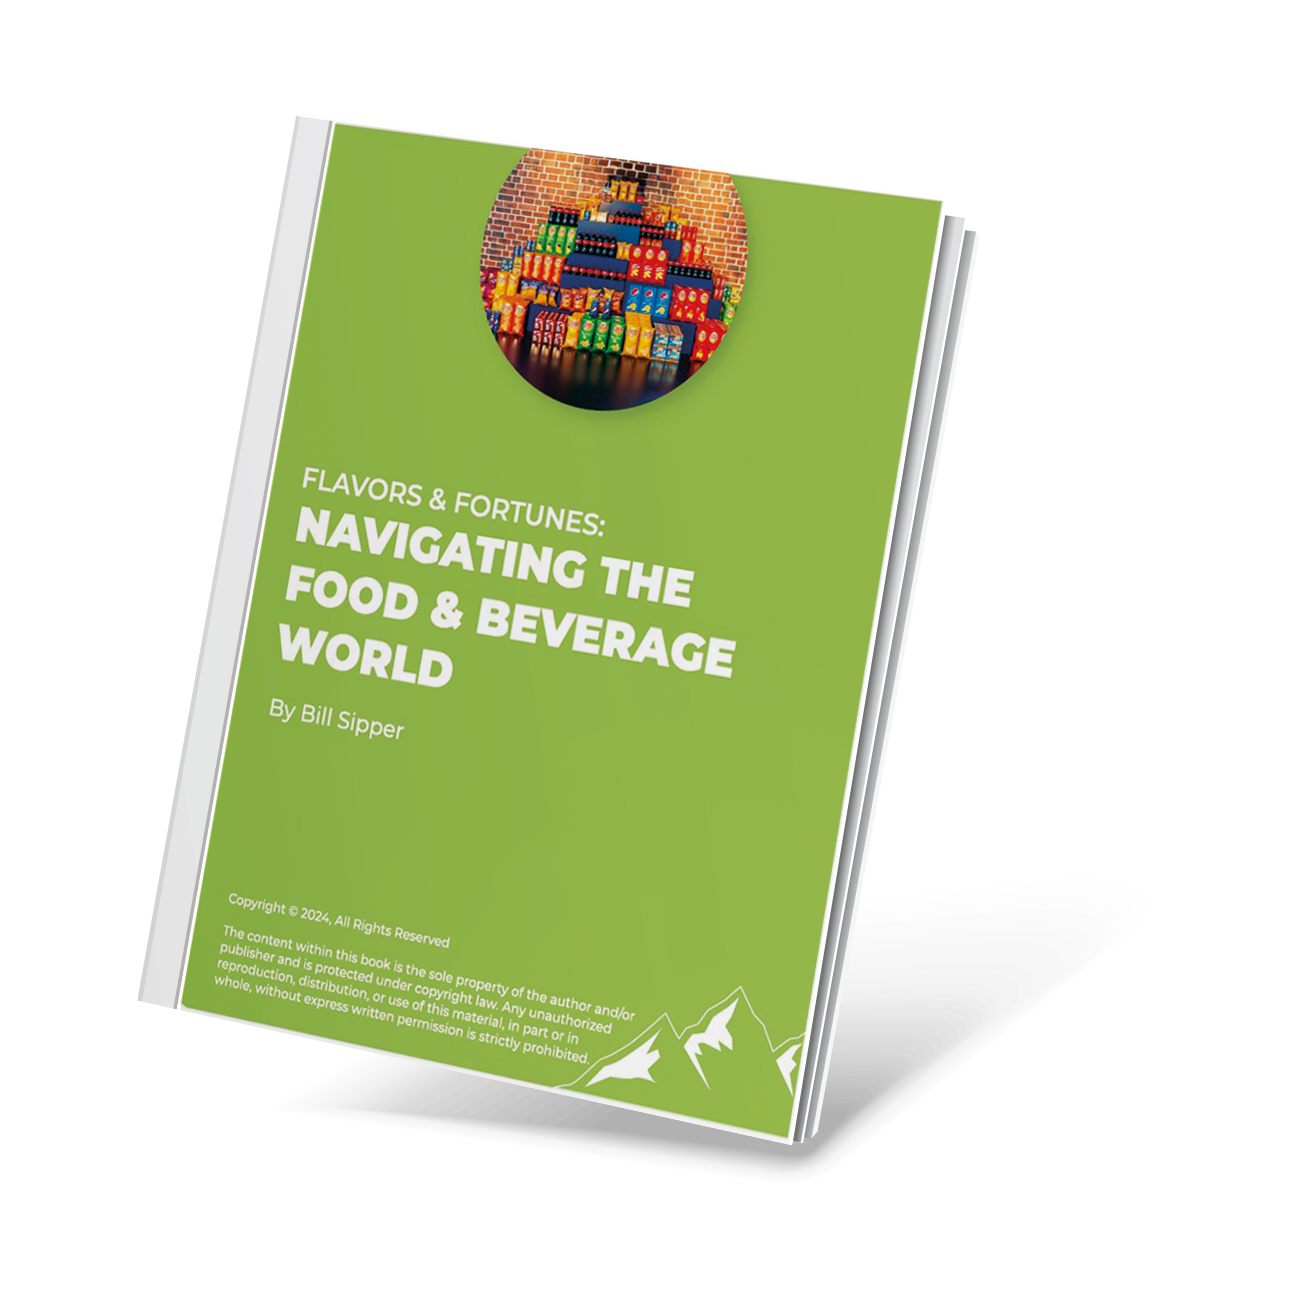 The Definitive Manual for the Food and Beverage Industry